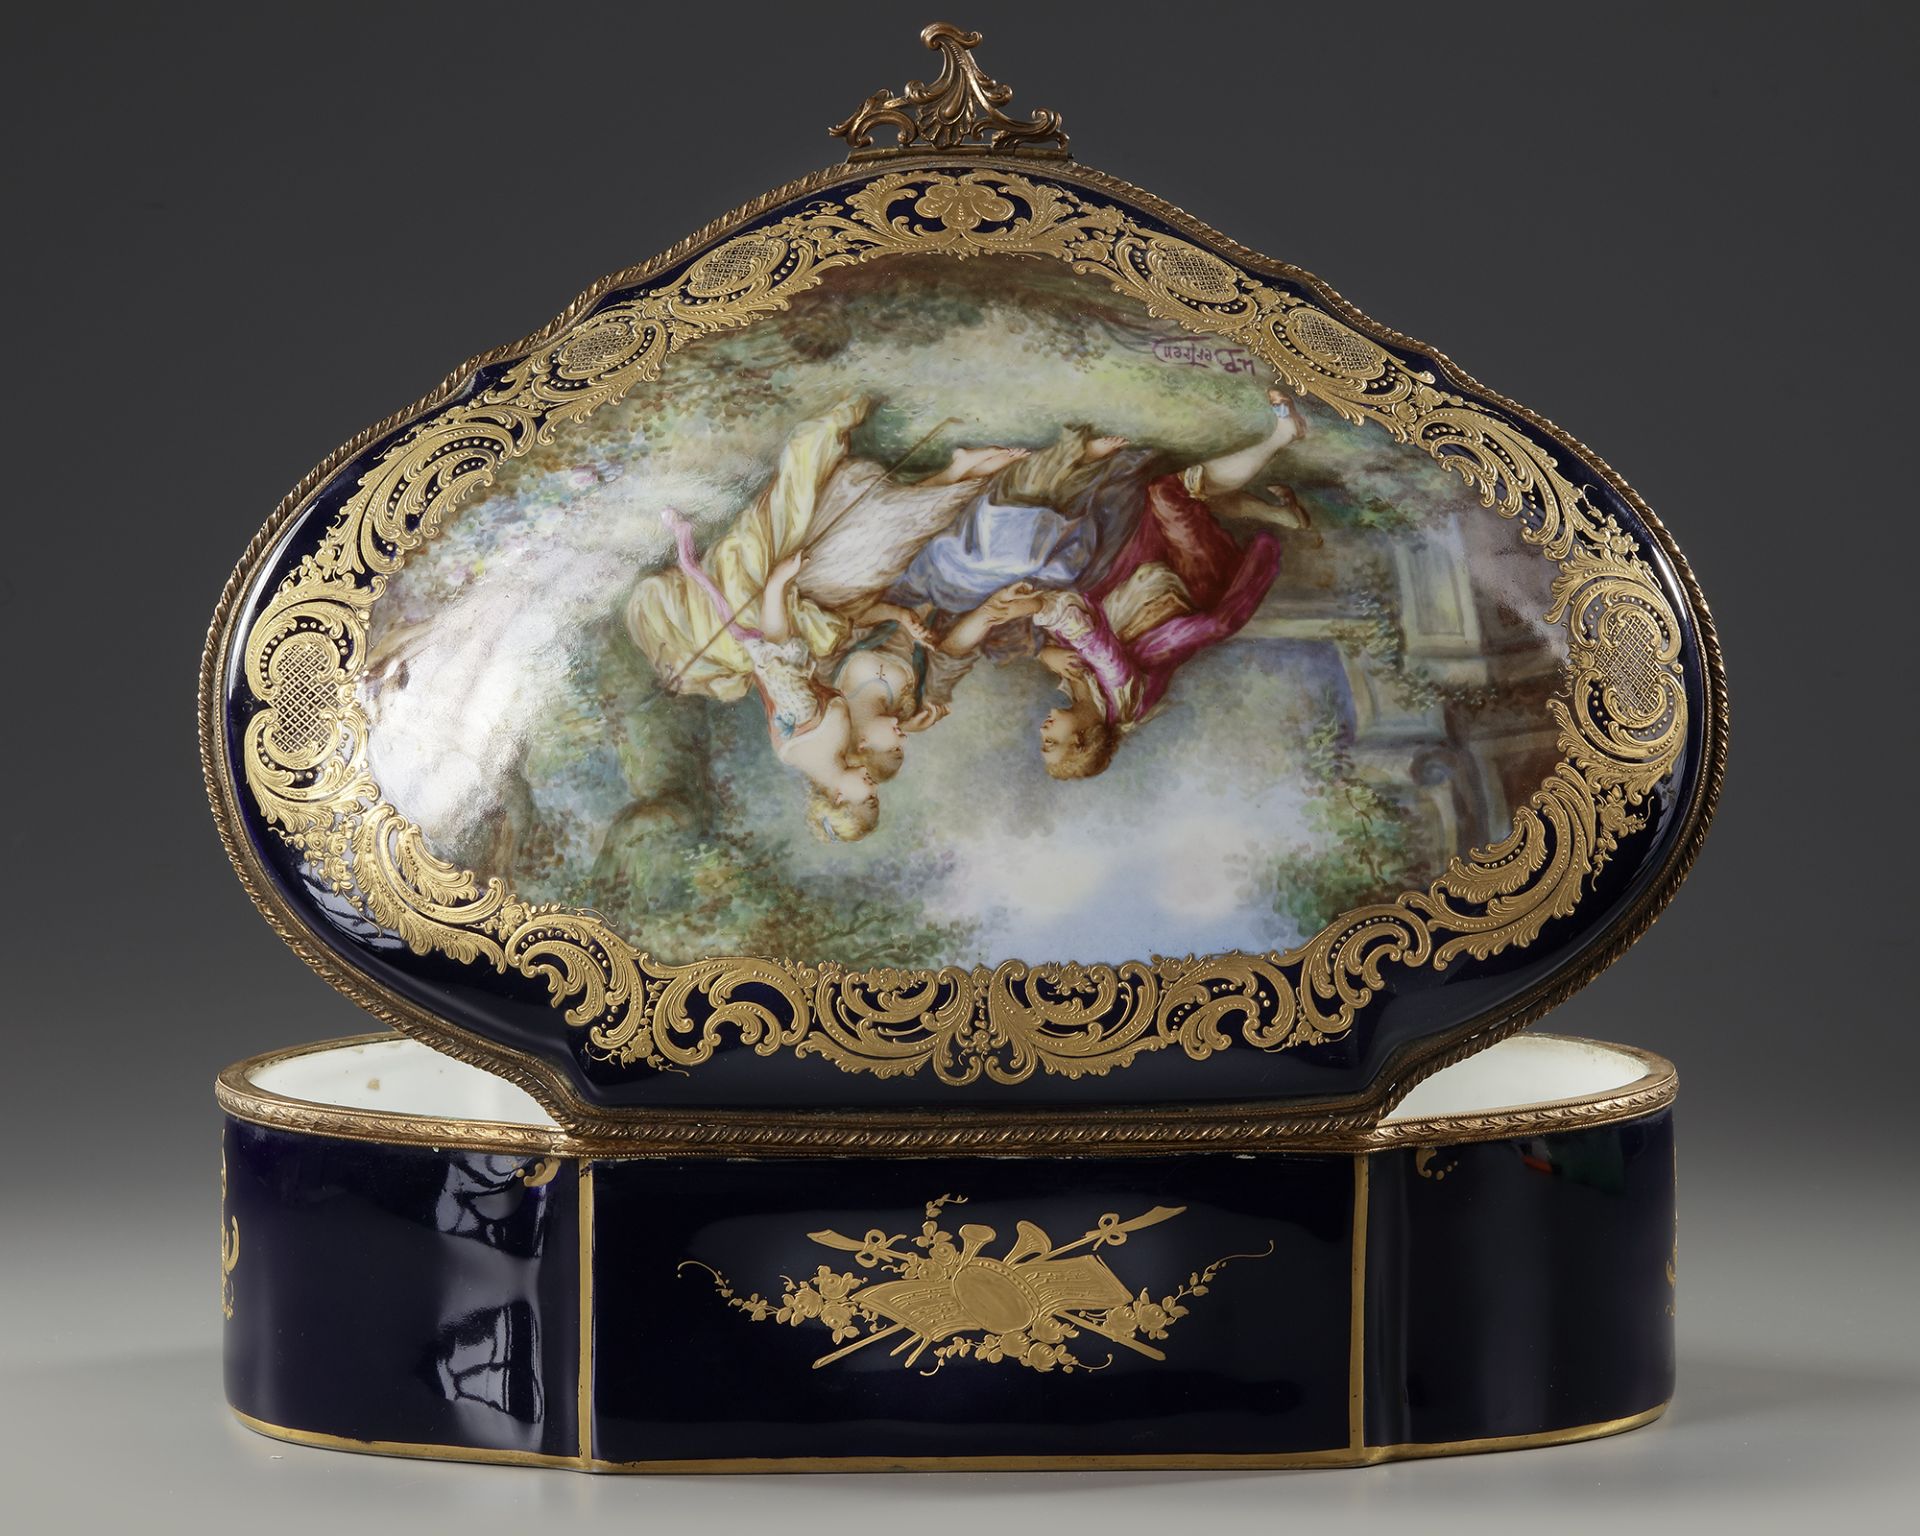 A PORCELAIN JEWELRY BOX, 19TH CENTURY - Image 4 of 5